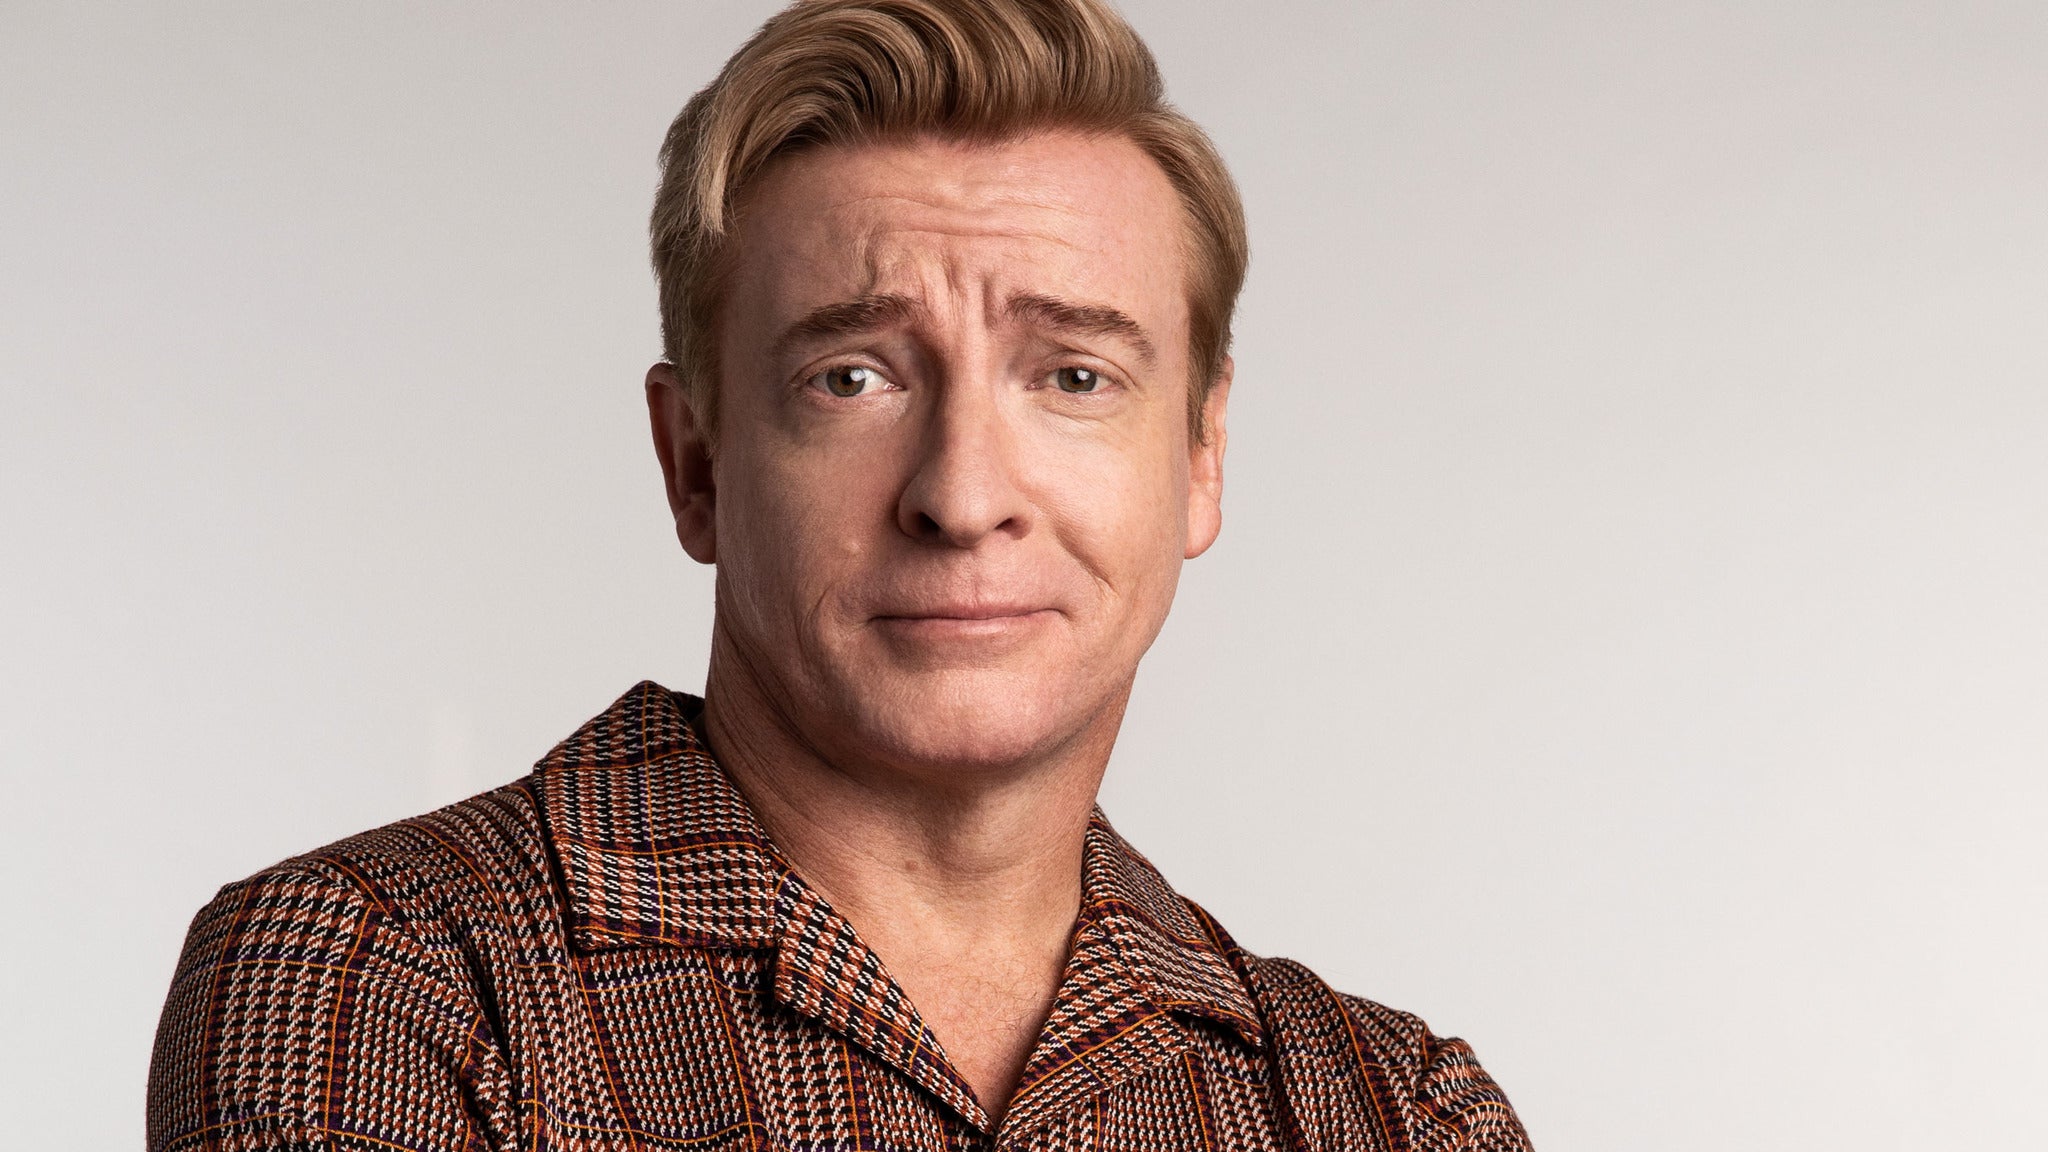 Image used with permission from Ticketmaster | Rhys Darby 25 Years tickets